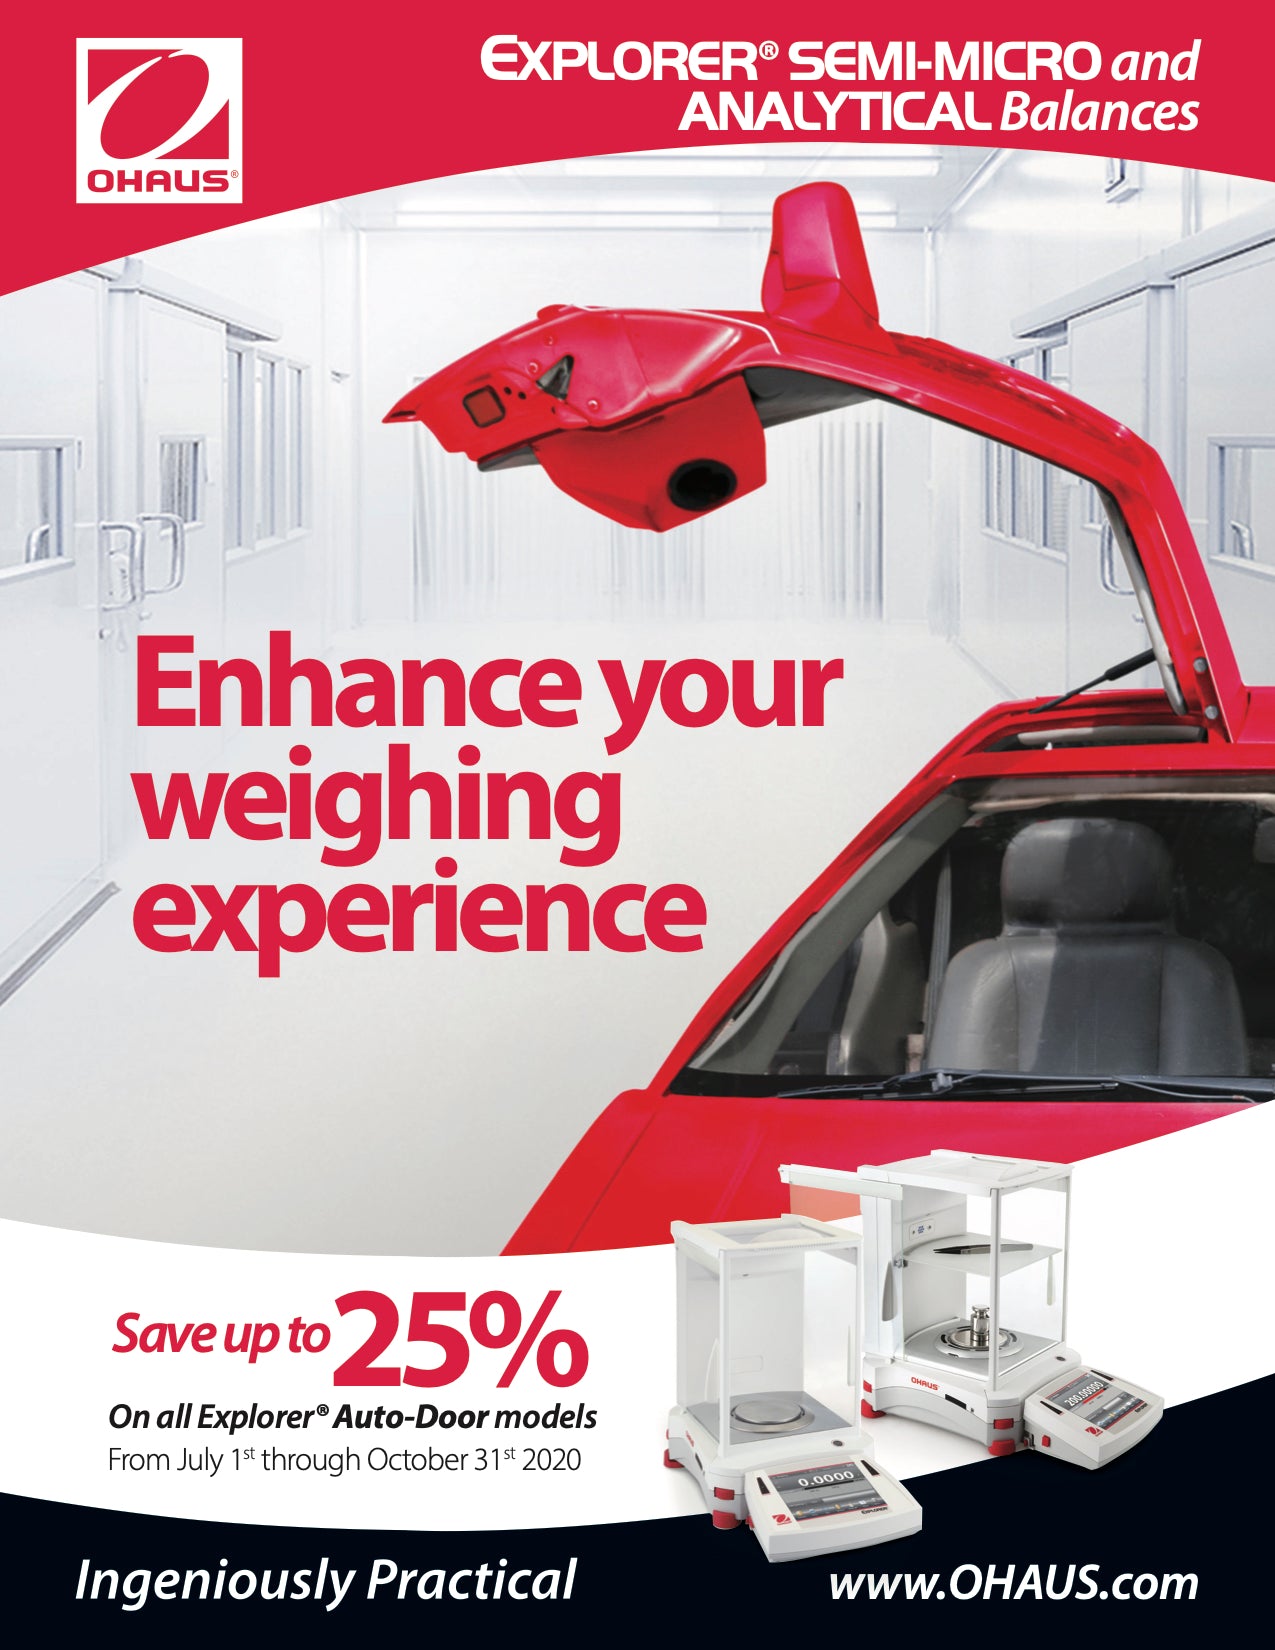 SAVE up to 25% On all Ohaus Explorer® Balance Auto-Door models